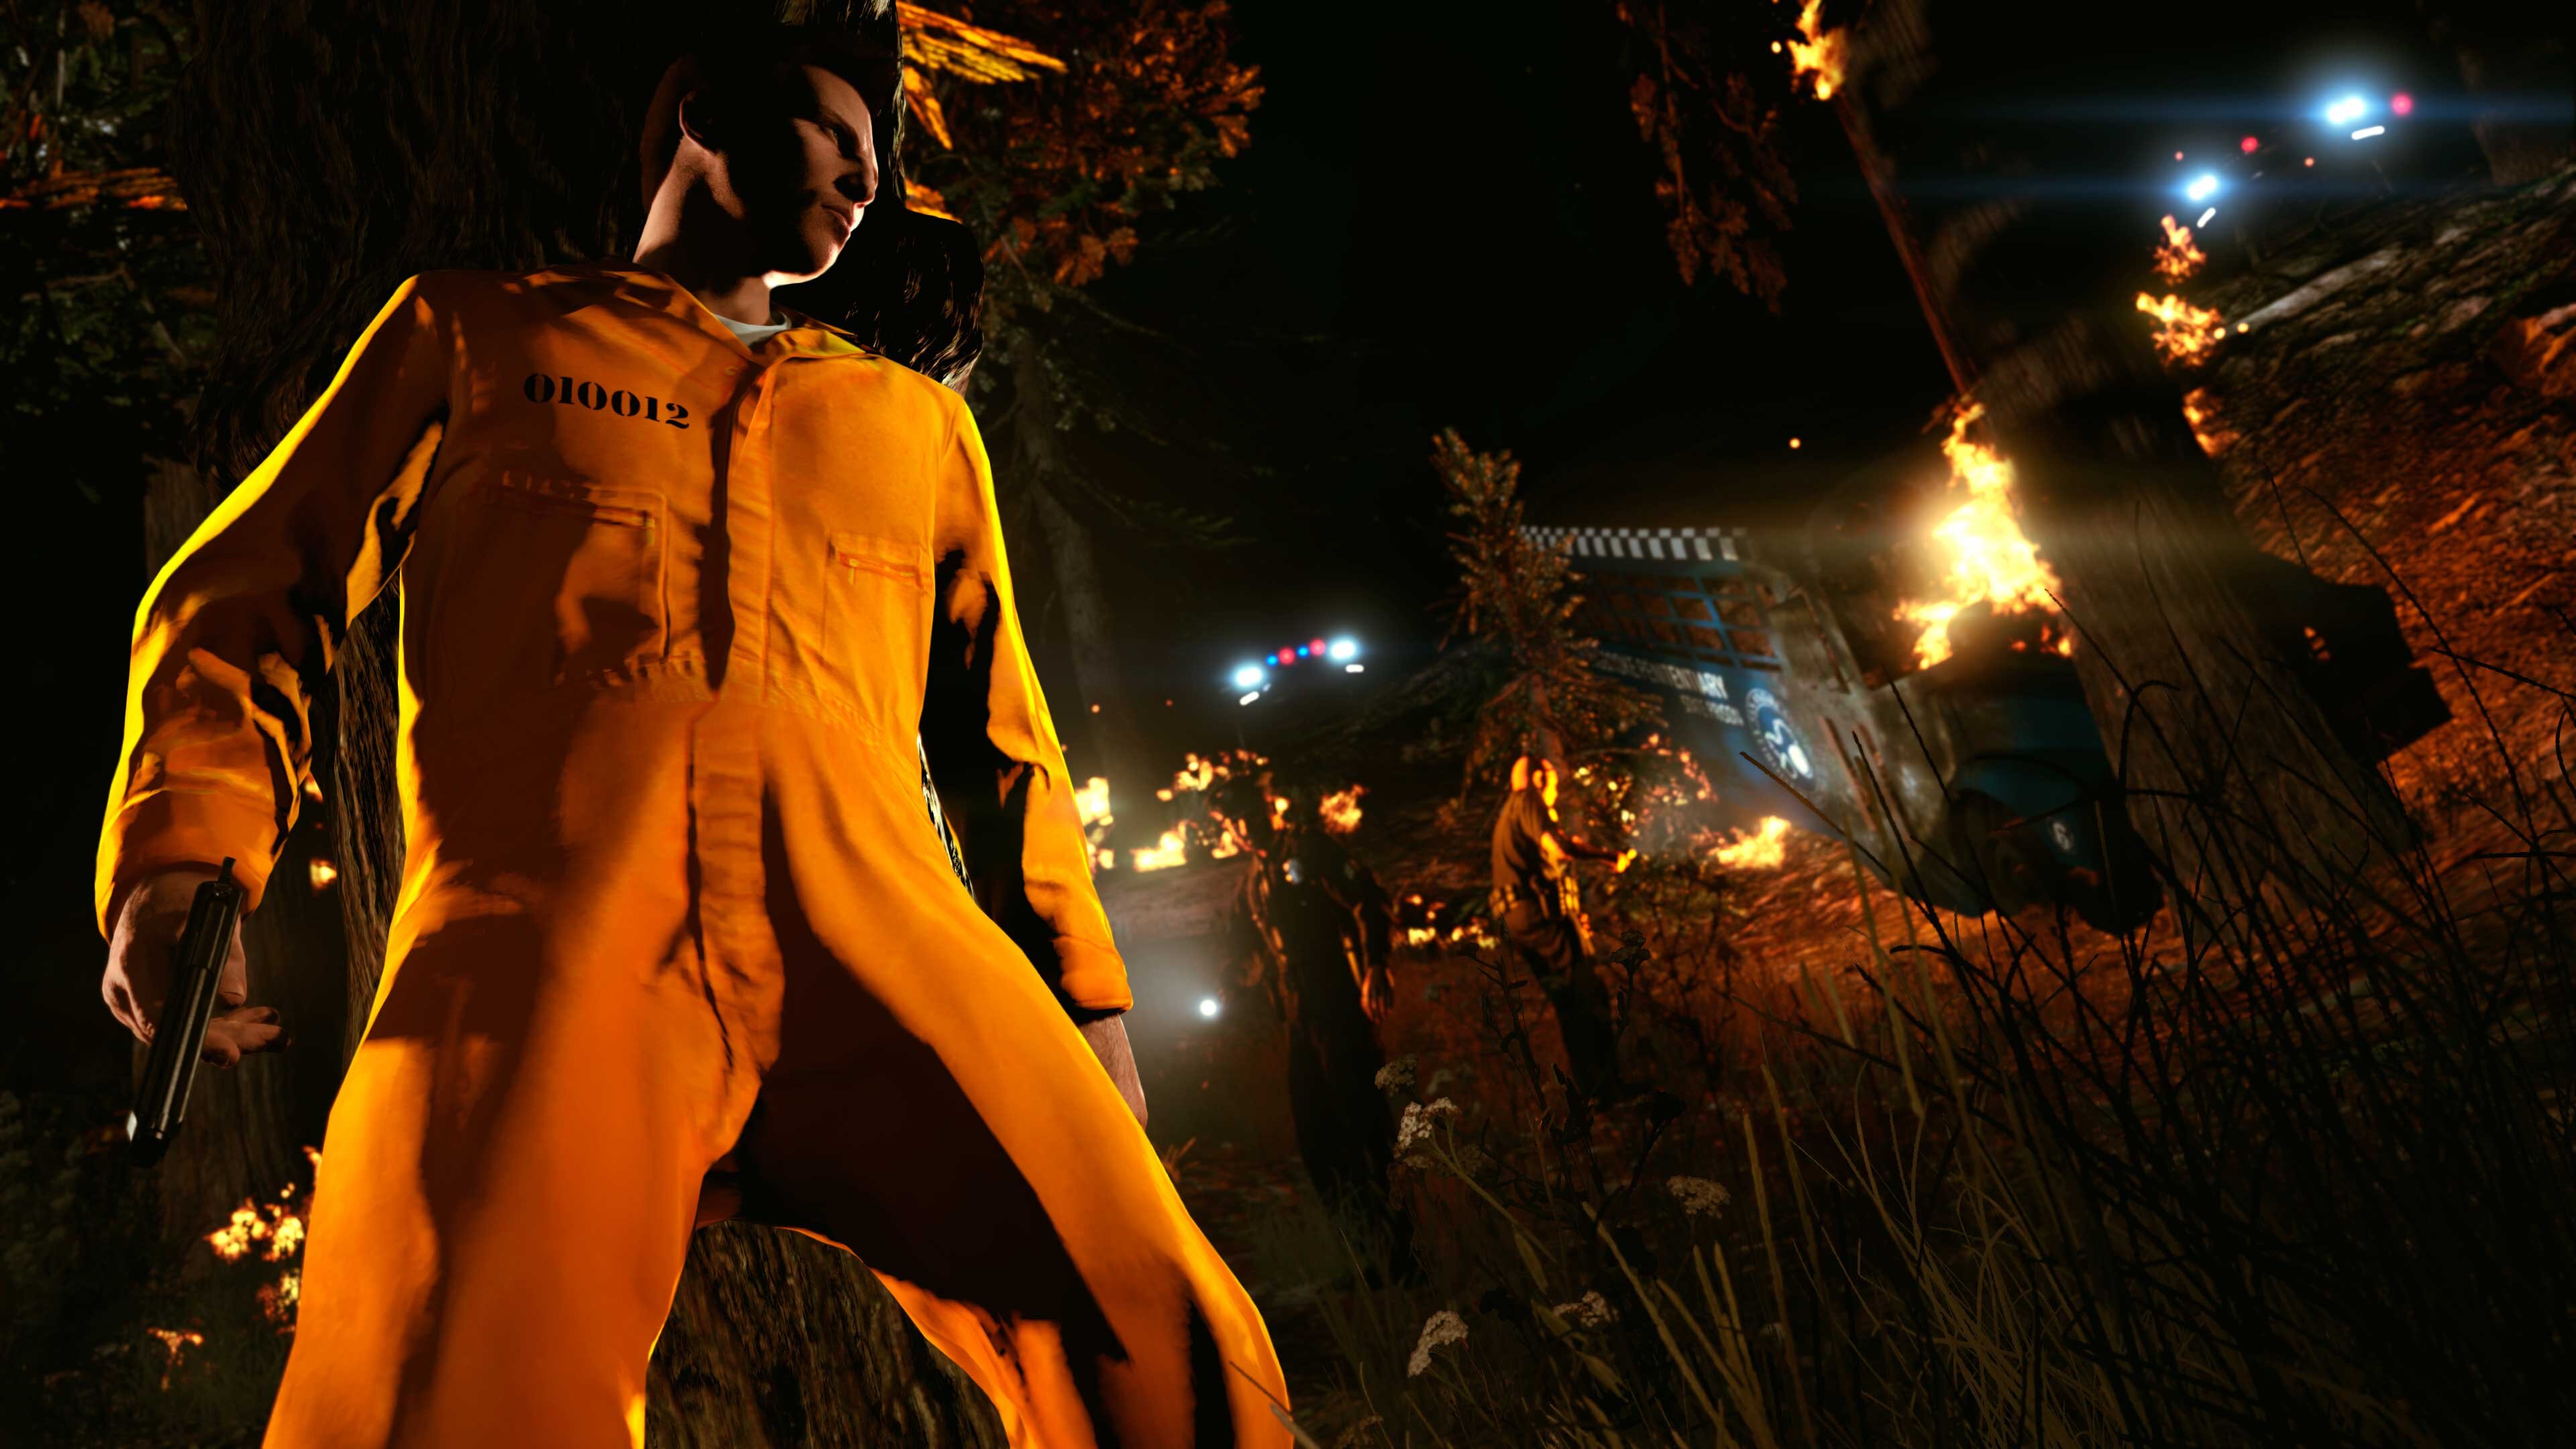 More information about "Claim de Liberty City Penitentiary Coveralls in GTA Online"